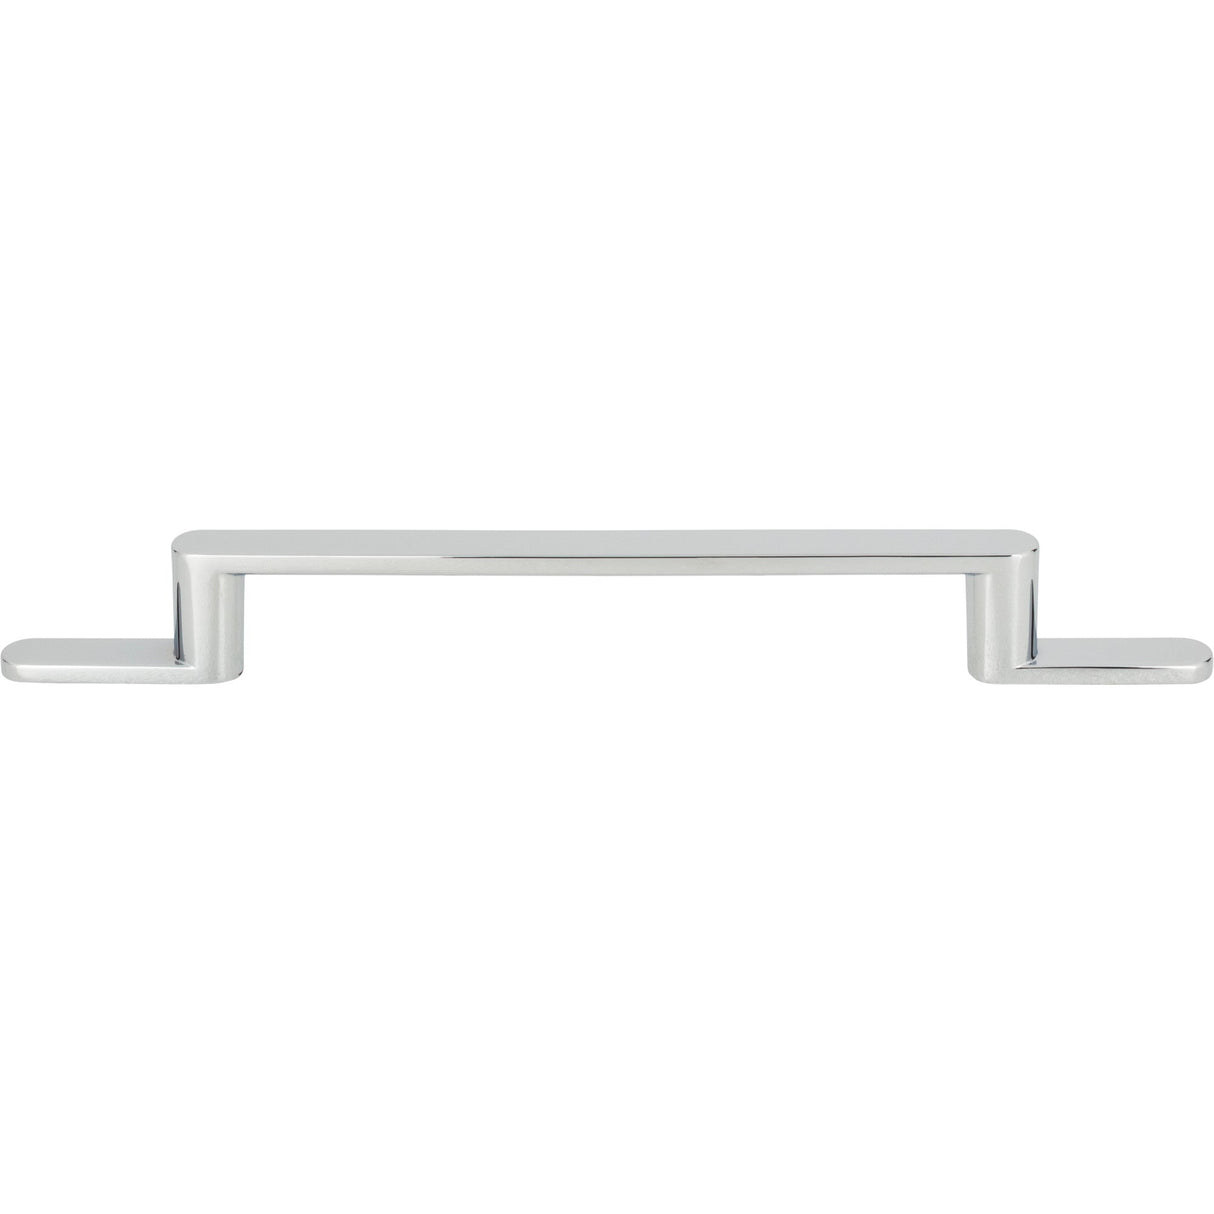 Atlas Homewares Alaire Pull 6 5/16 Inch (c-c) Polished Chrome